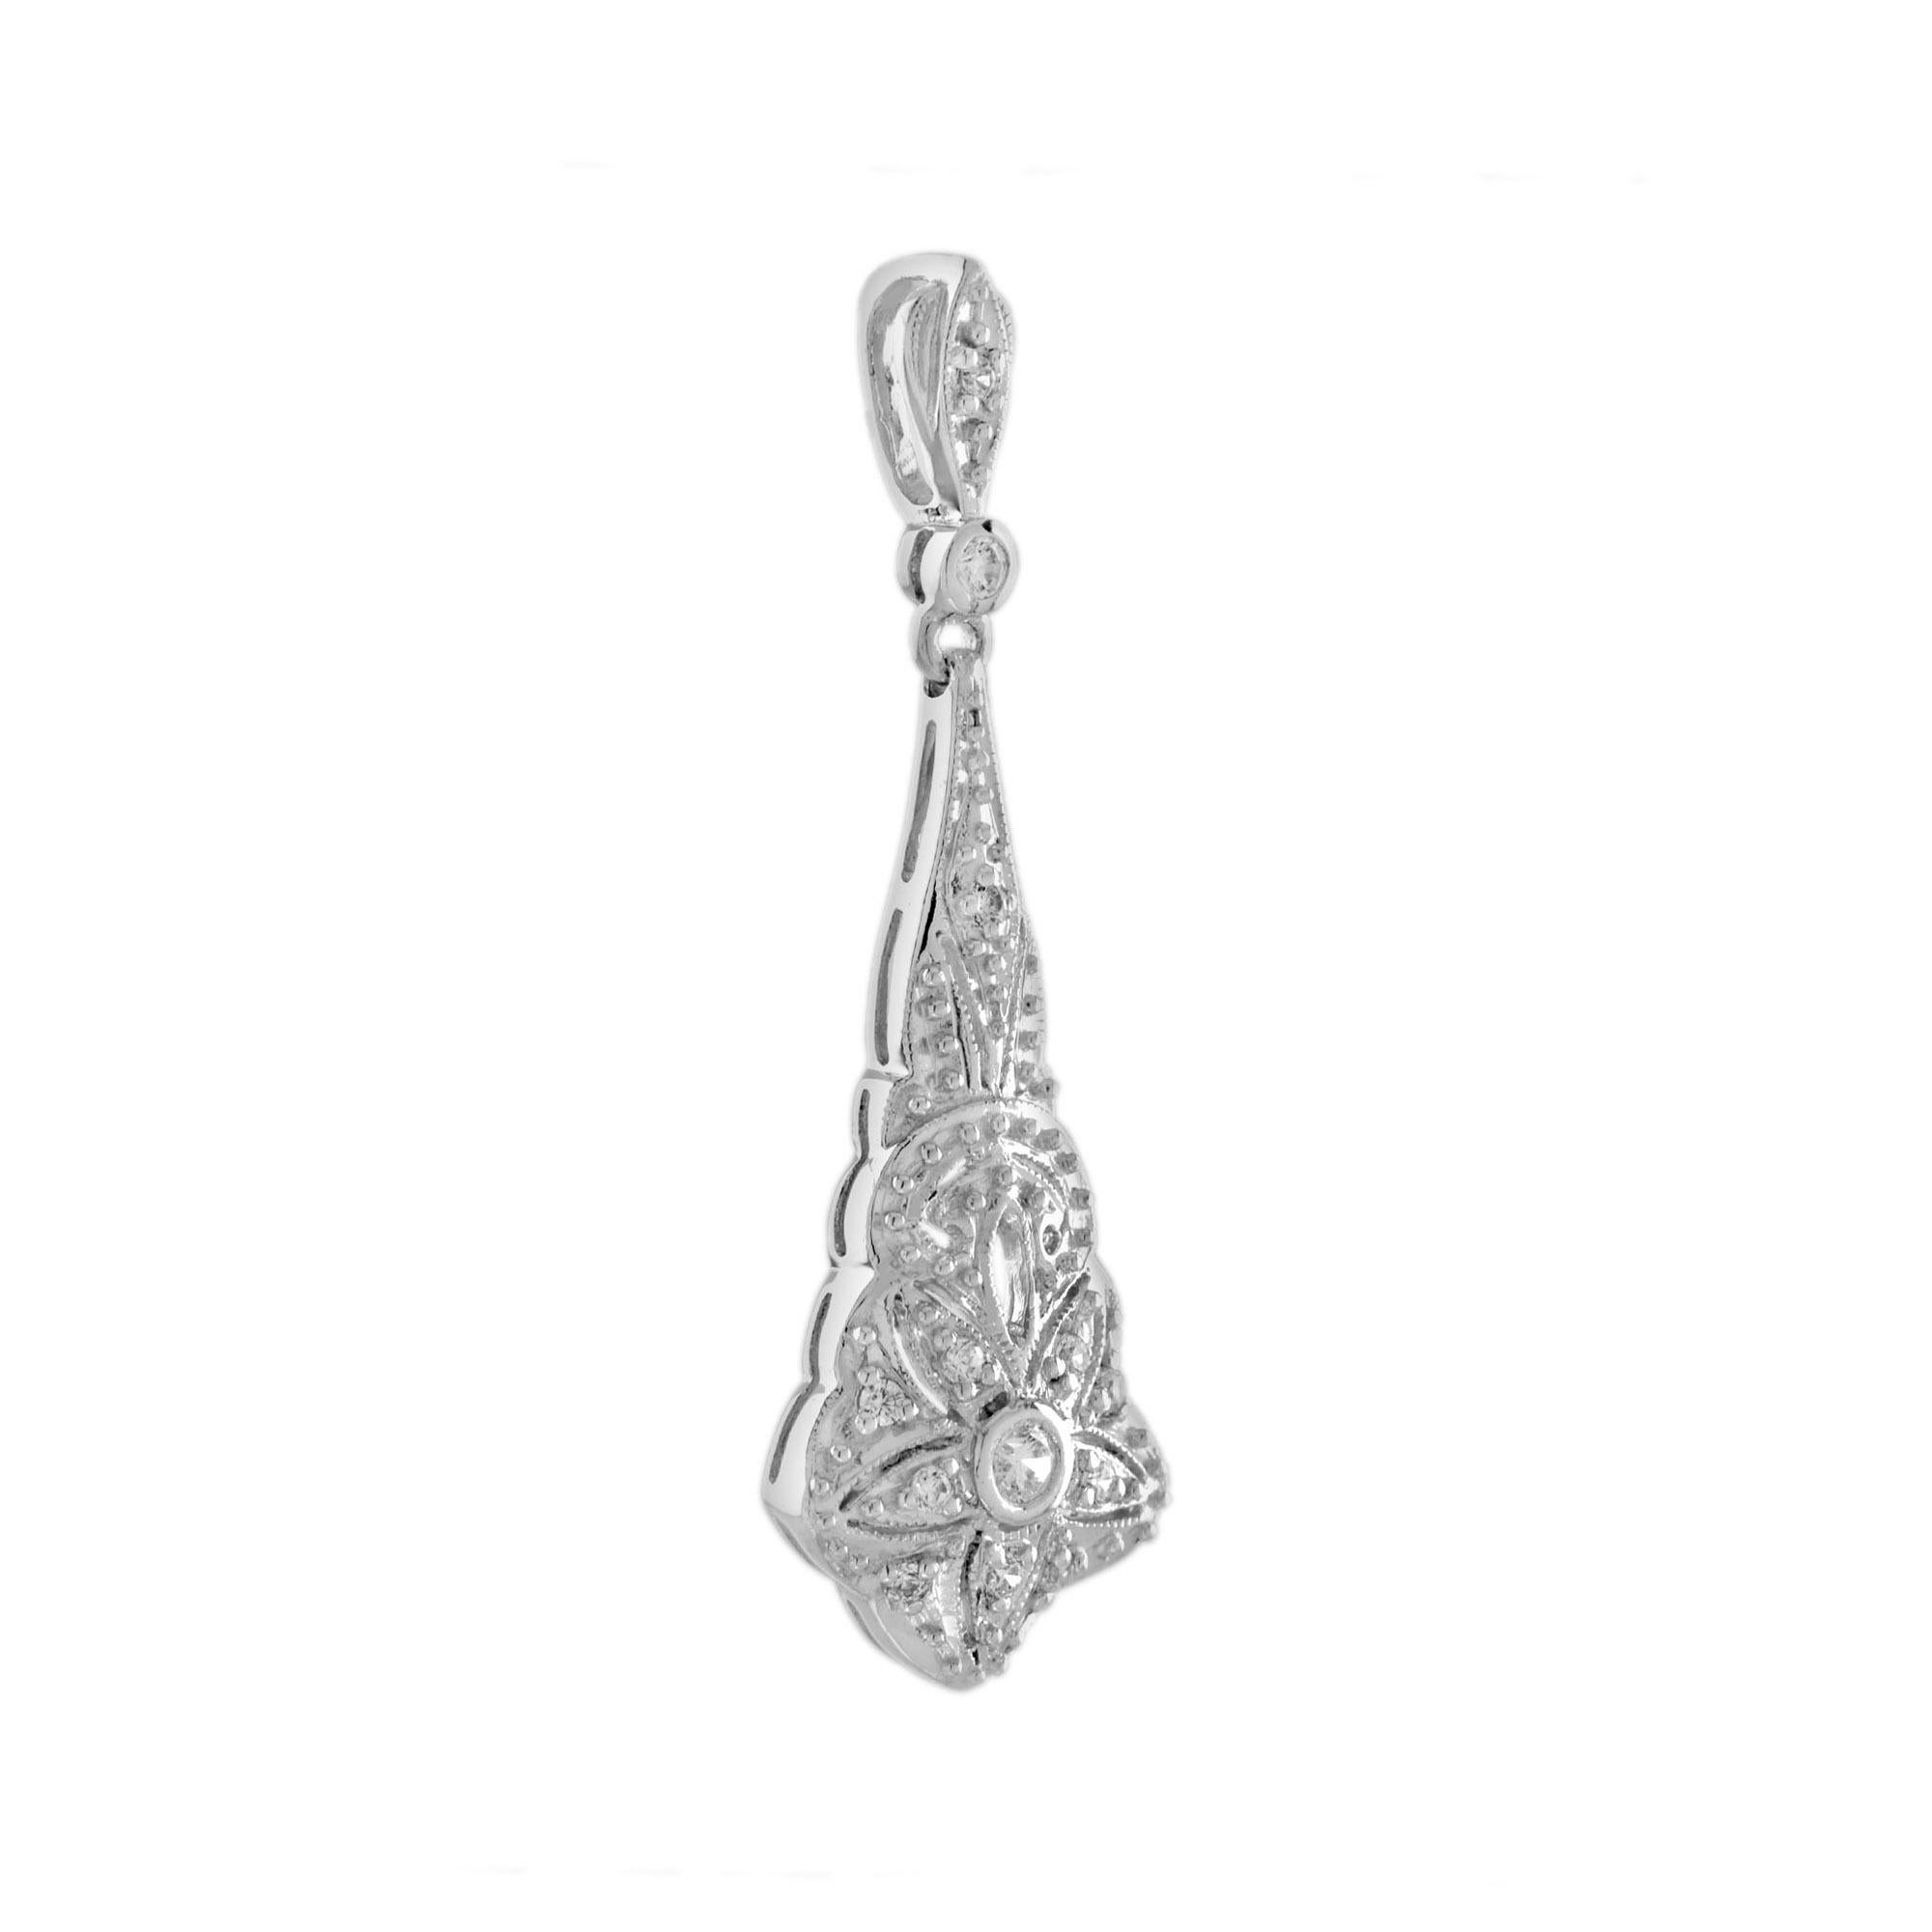 This white gold Art Deco inspired pendant preserves in its lozenge outline a five petals flower with a round cut diamond as its heart. This joyful jewel encrusted with a total of 0.17 carat diamonds dangles from a suspension, which completes its